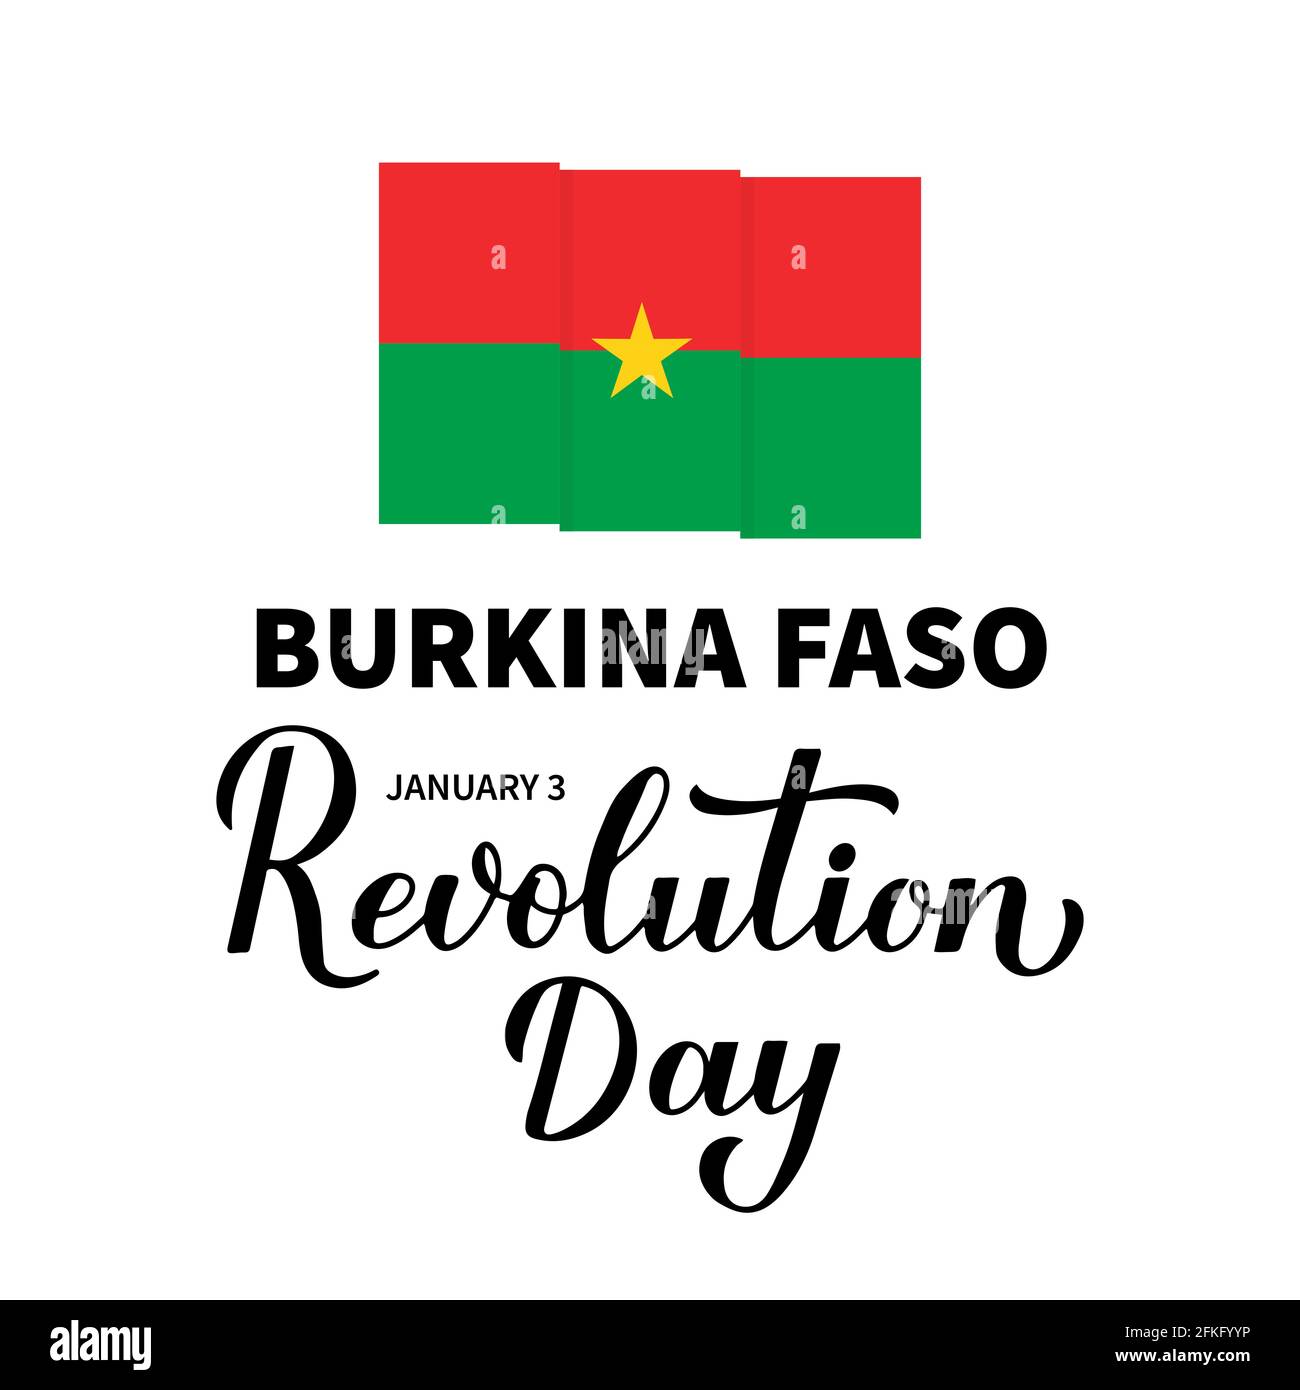 BURKINA FASO MARTYR DAY CELEBRATIONS POSTER, Template